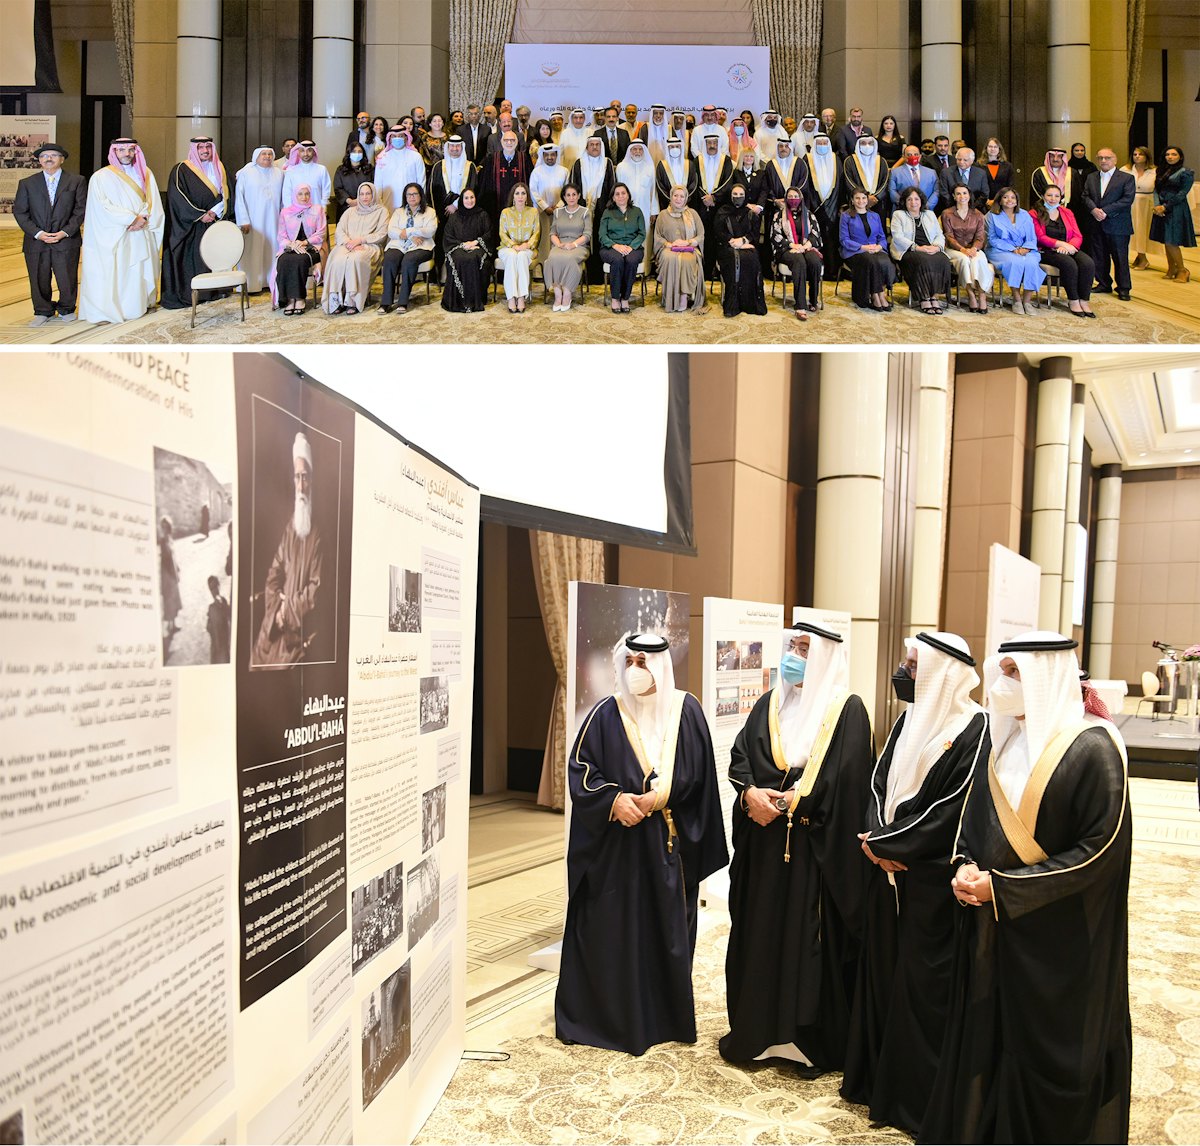 A national gathering on coexistence held by the Bahá’ís of Bahrain brought together Sheikh Khalid bin Khalifa Al Khalifa, representing the king of Bahrain, and other prominent people to reflect on ‘Abdu’l-Bahá’s call for peace.